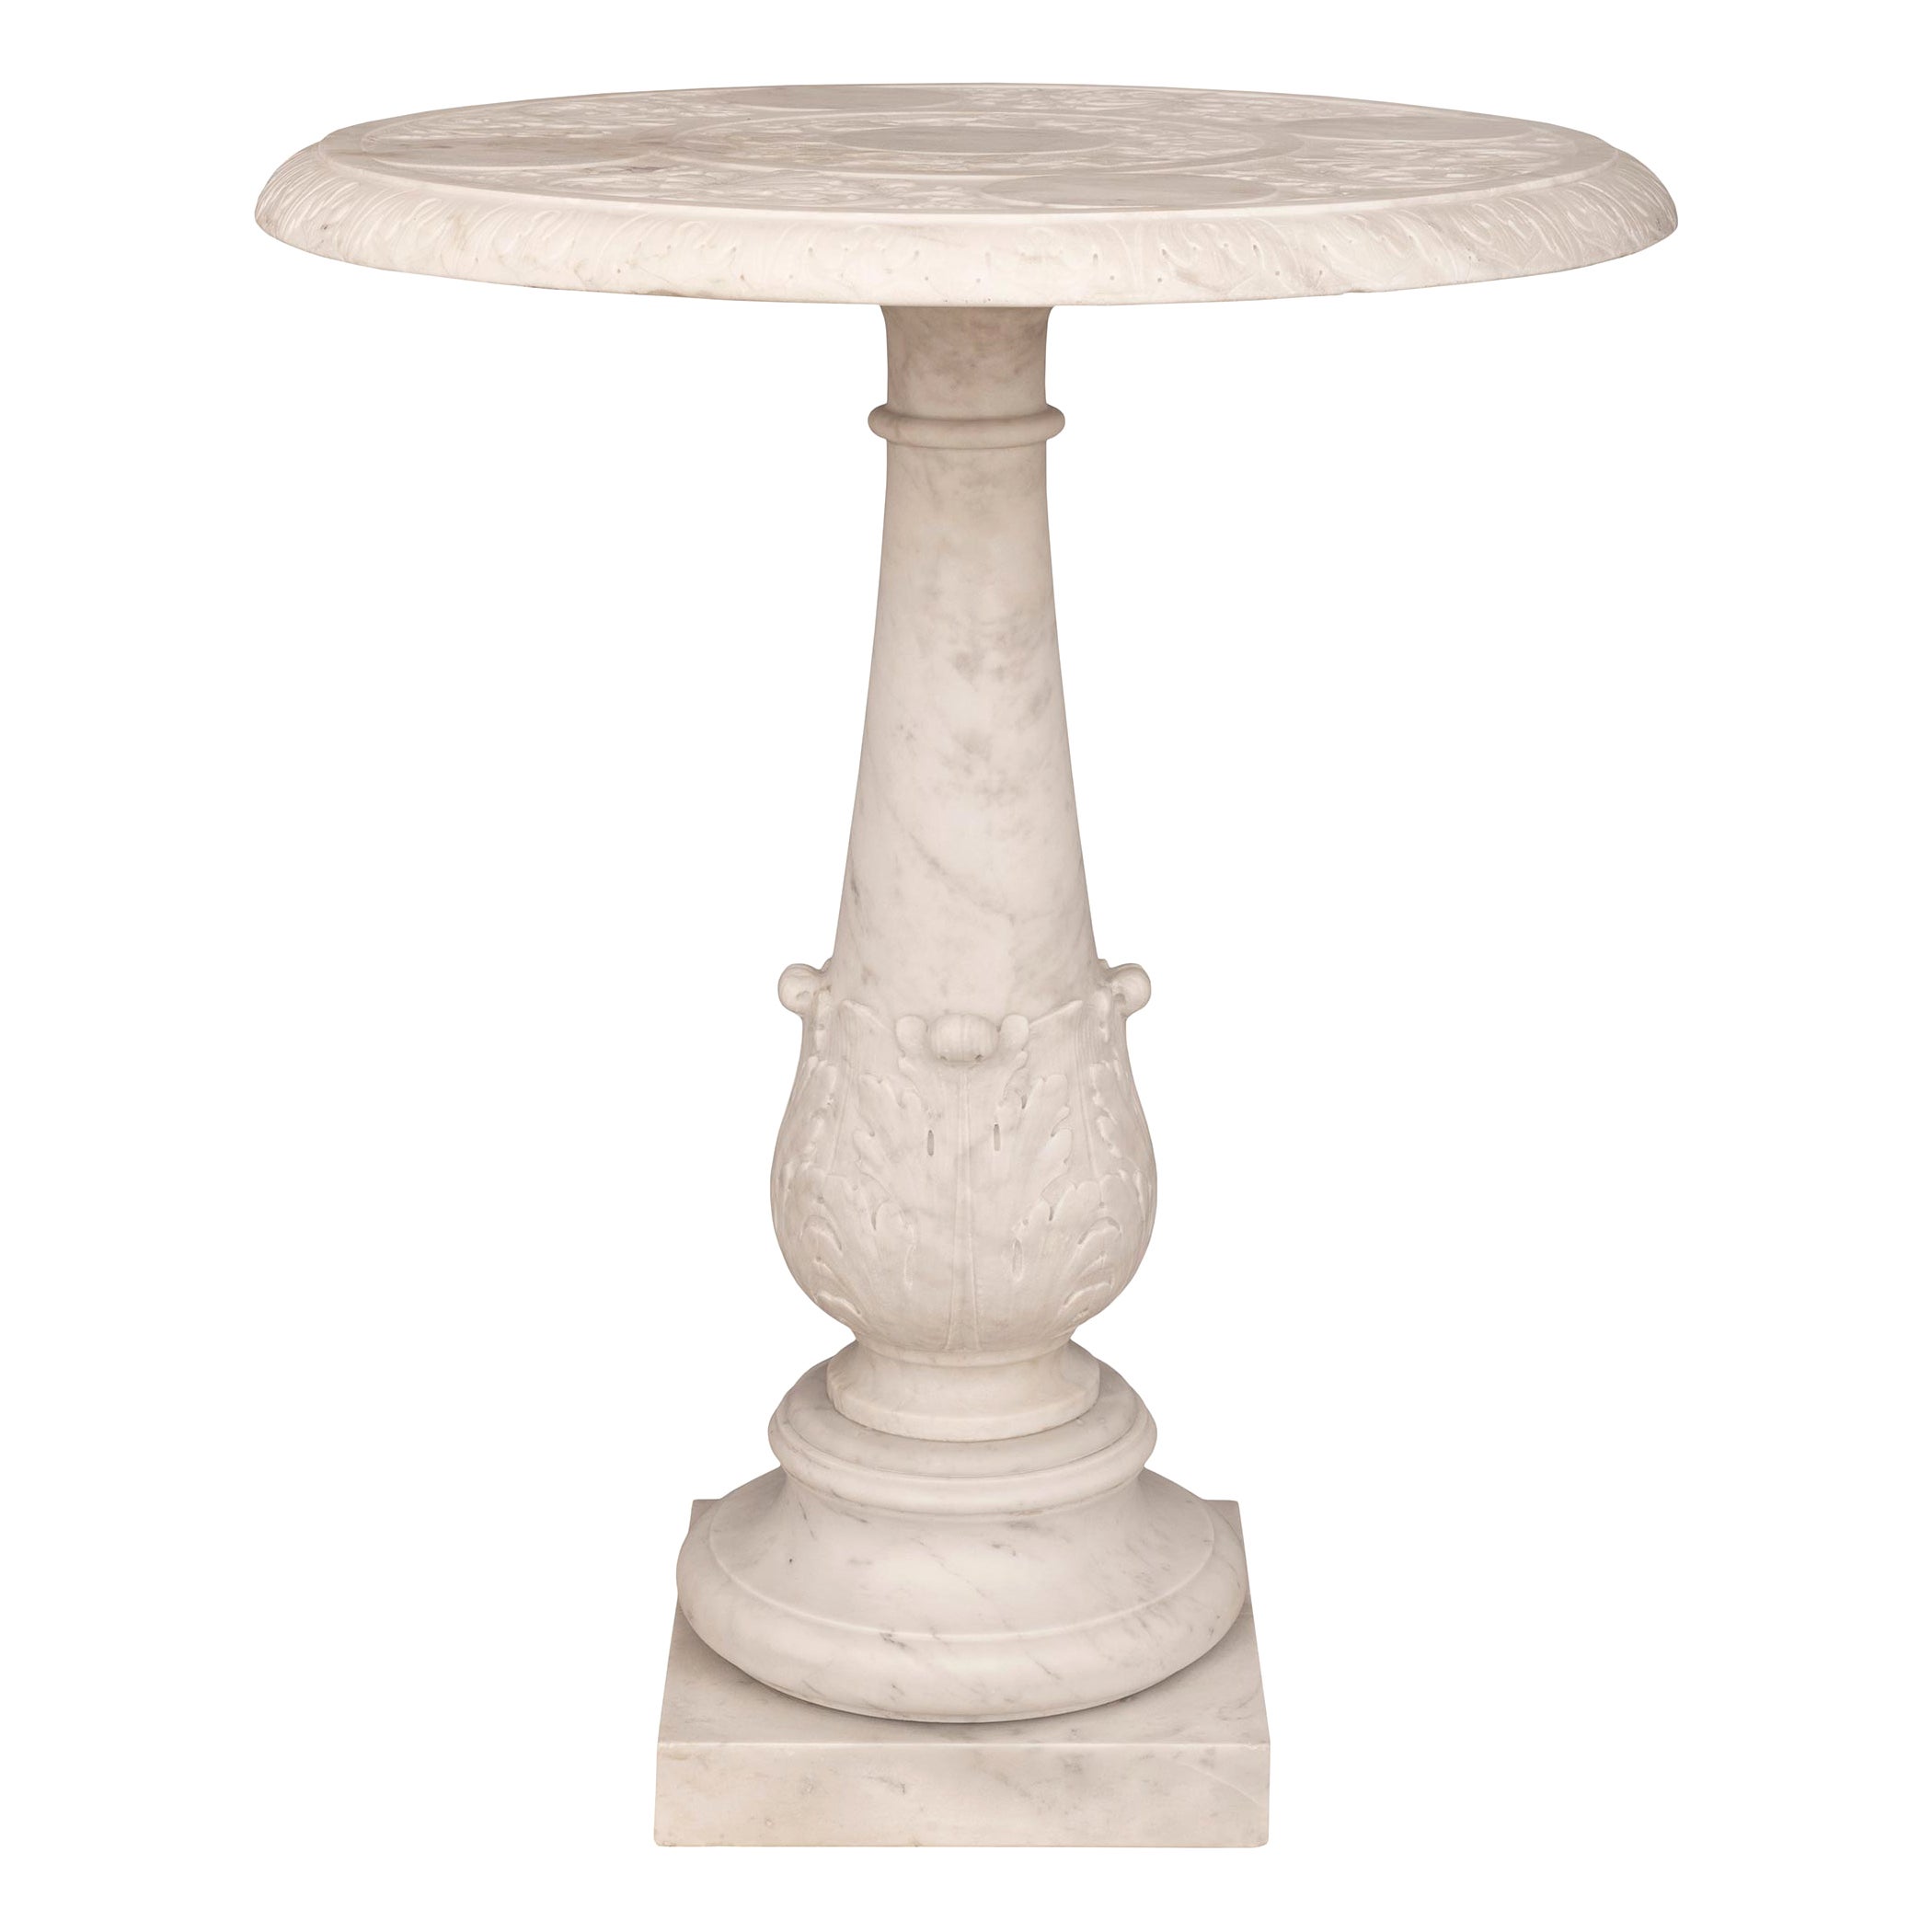 Italian 19th Century Louis XVI St. Solid White Carrara Marble Side Table For Sale